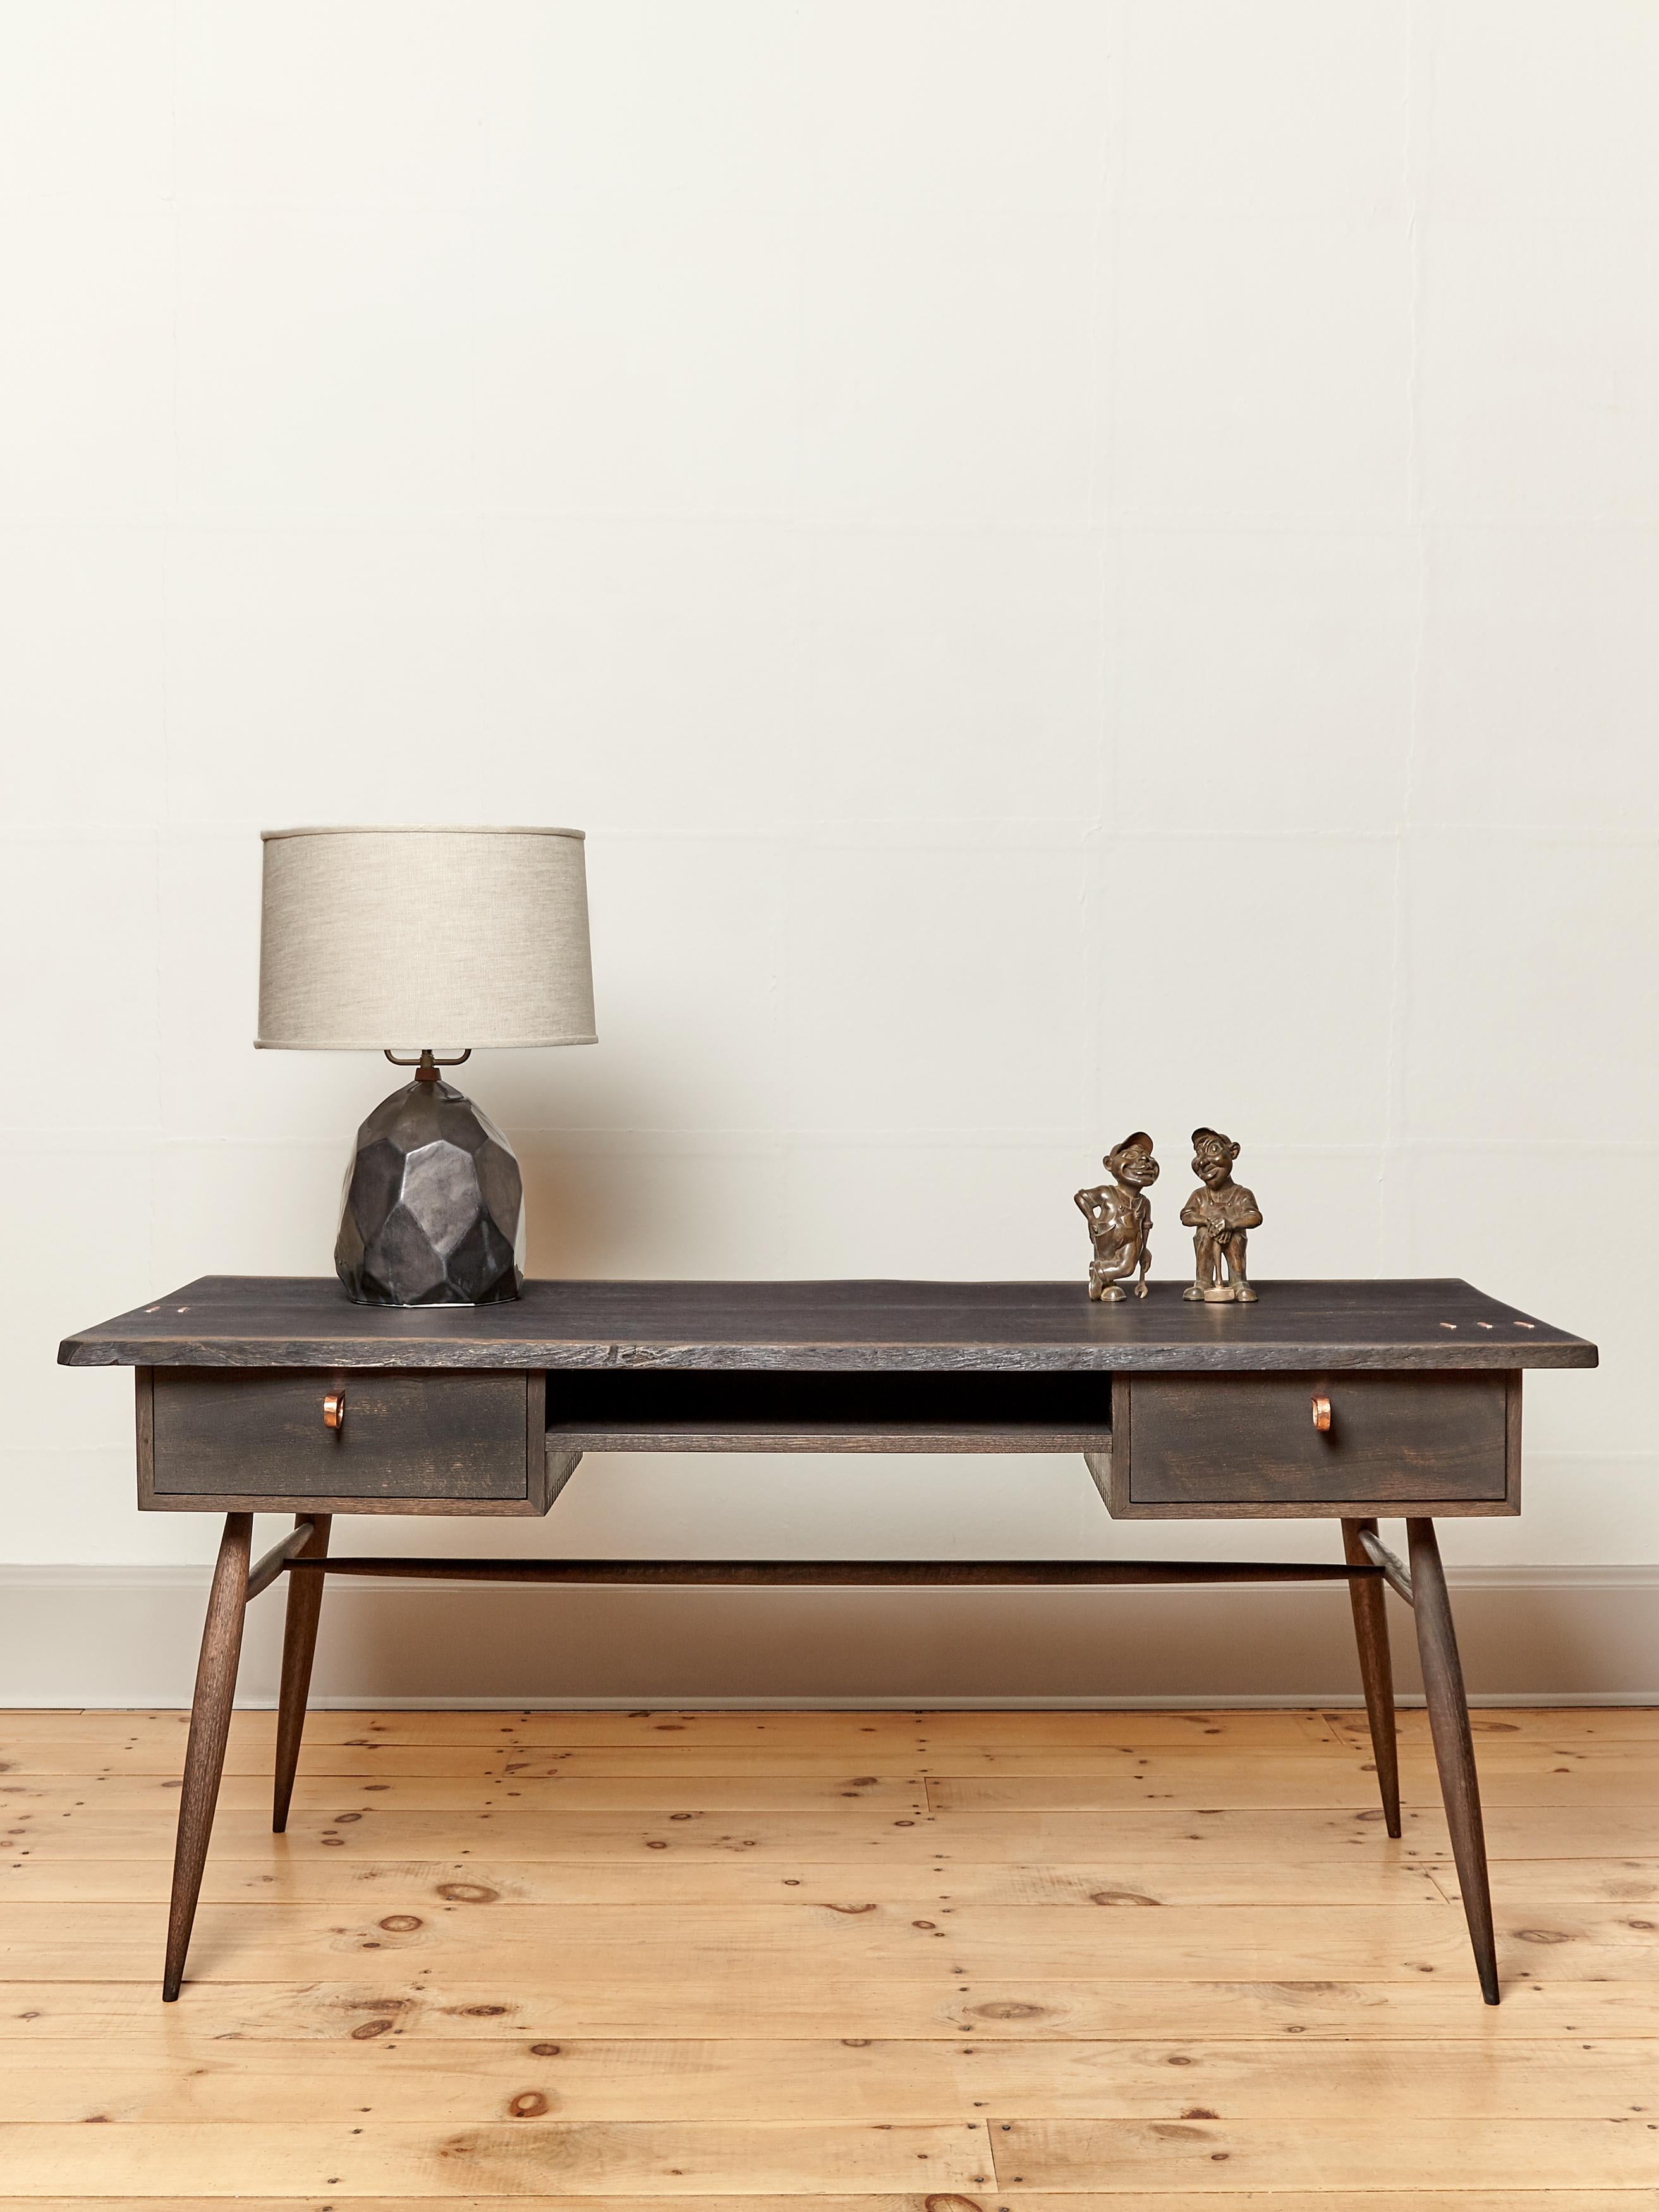 American Handcrafted Sculptural Blackened Oak Desk with Copper Staples For Sale